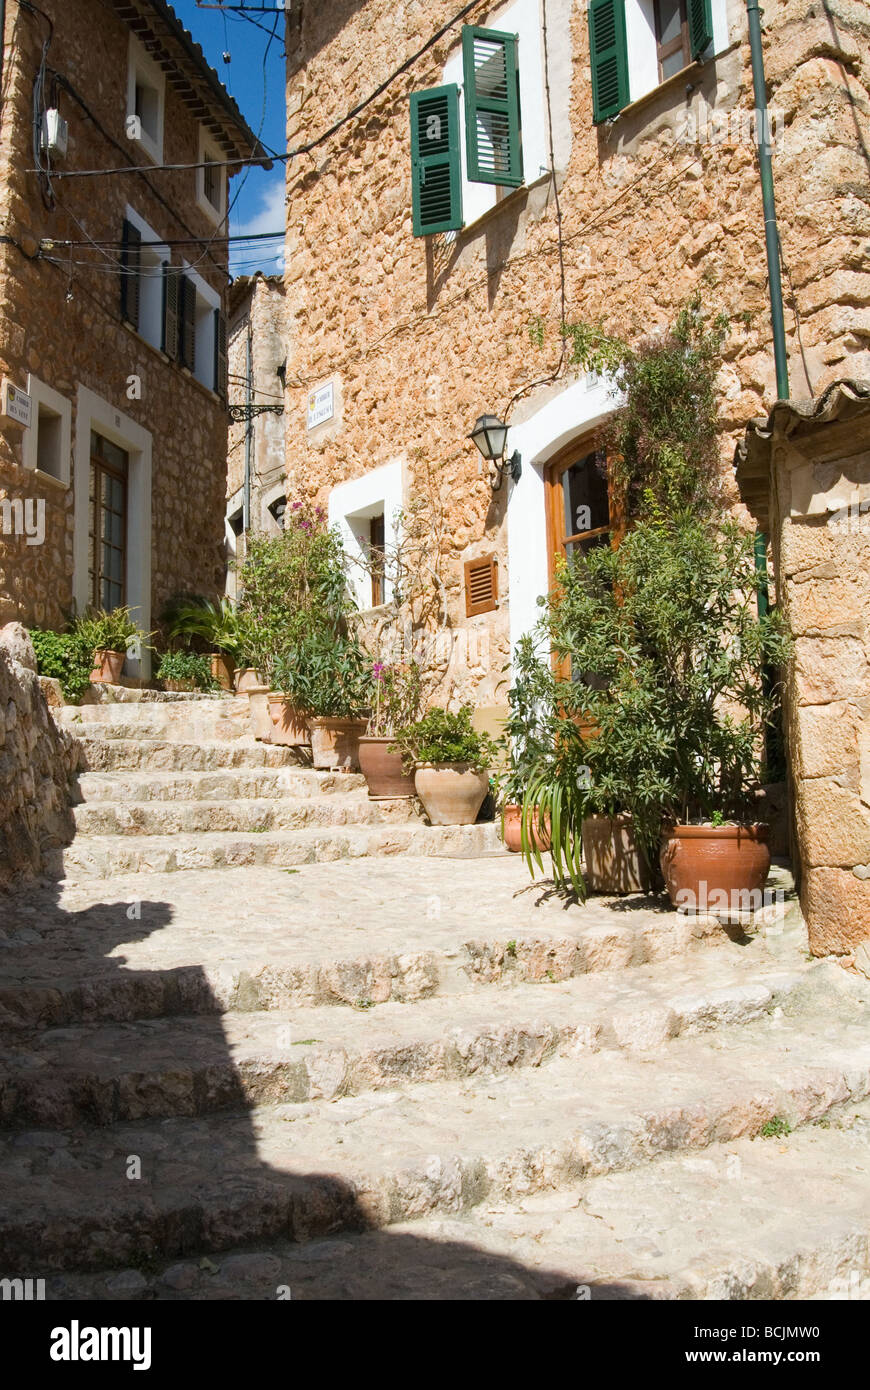 The village Fornalutx on the Balearic Island Mallorca, Spain. Stock Photo